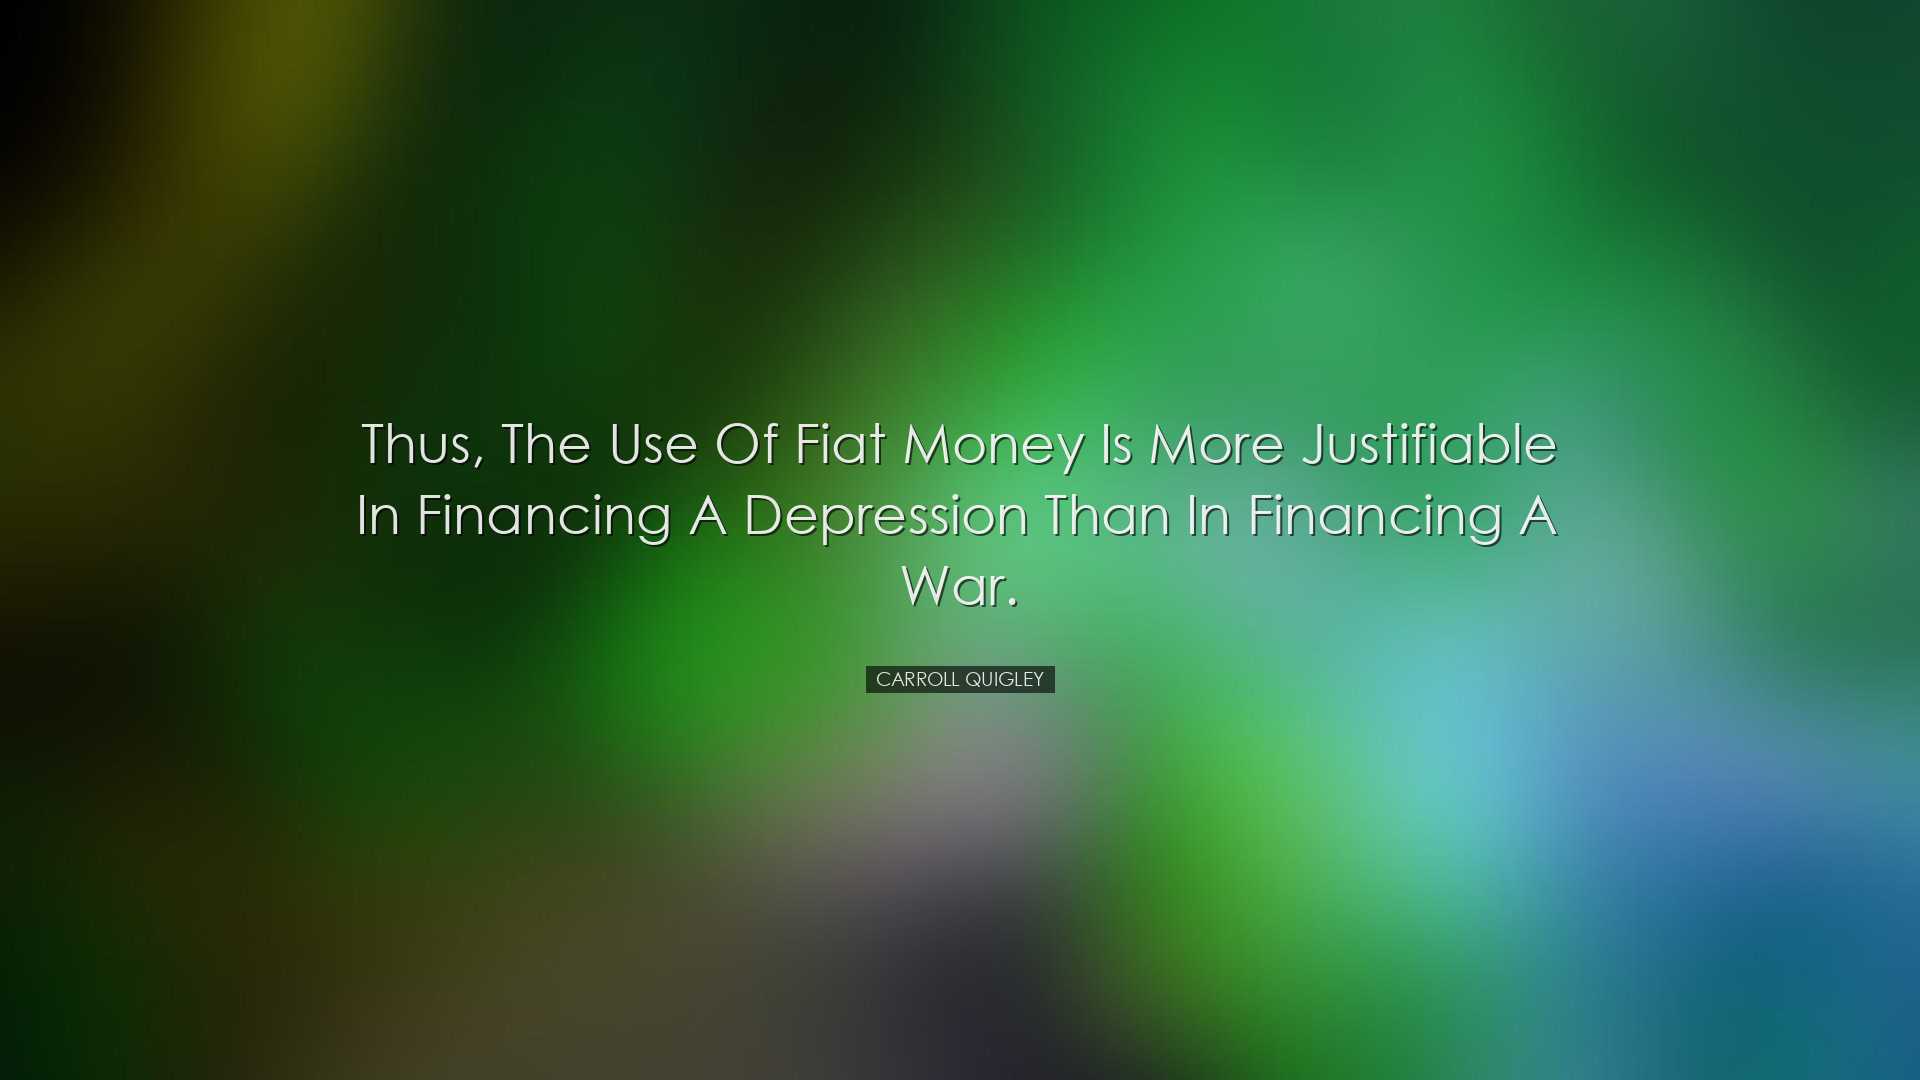 Thus, the use of fiat money is more justifiable in financing a dep